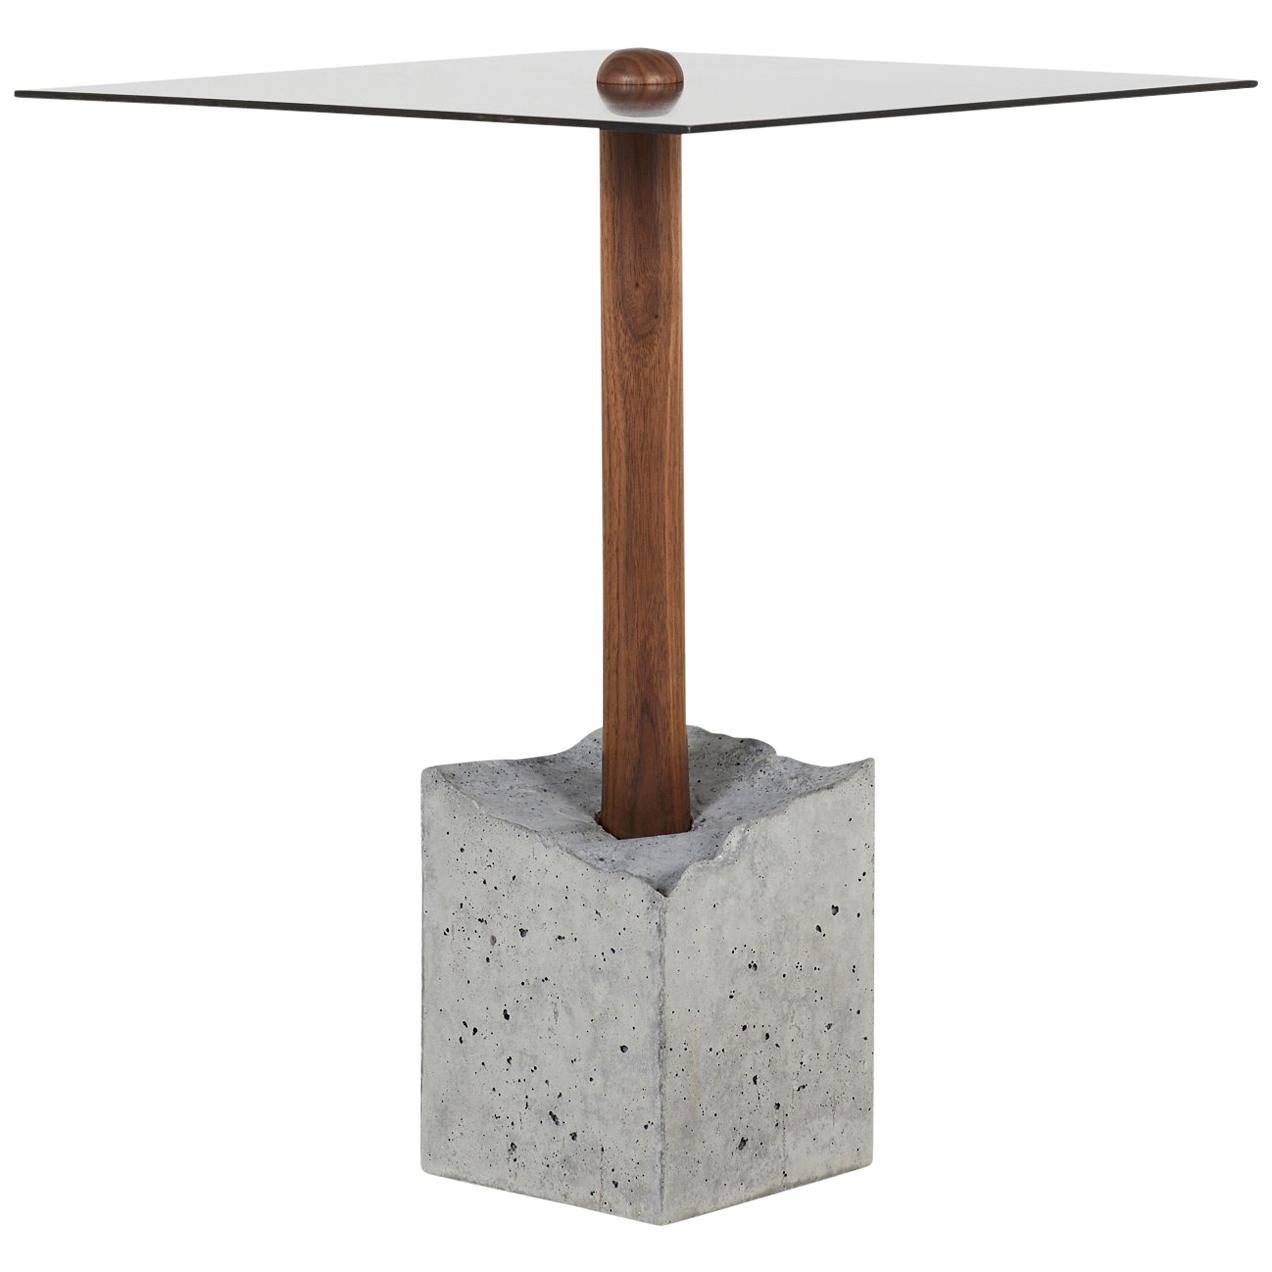 CT-1 Blackened Steel Side Table of Walnut and "Cracked" Cast Concrete